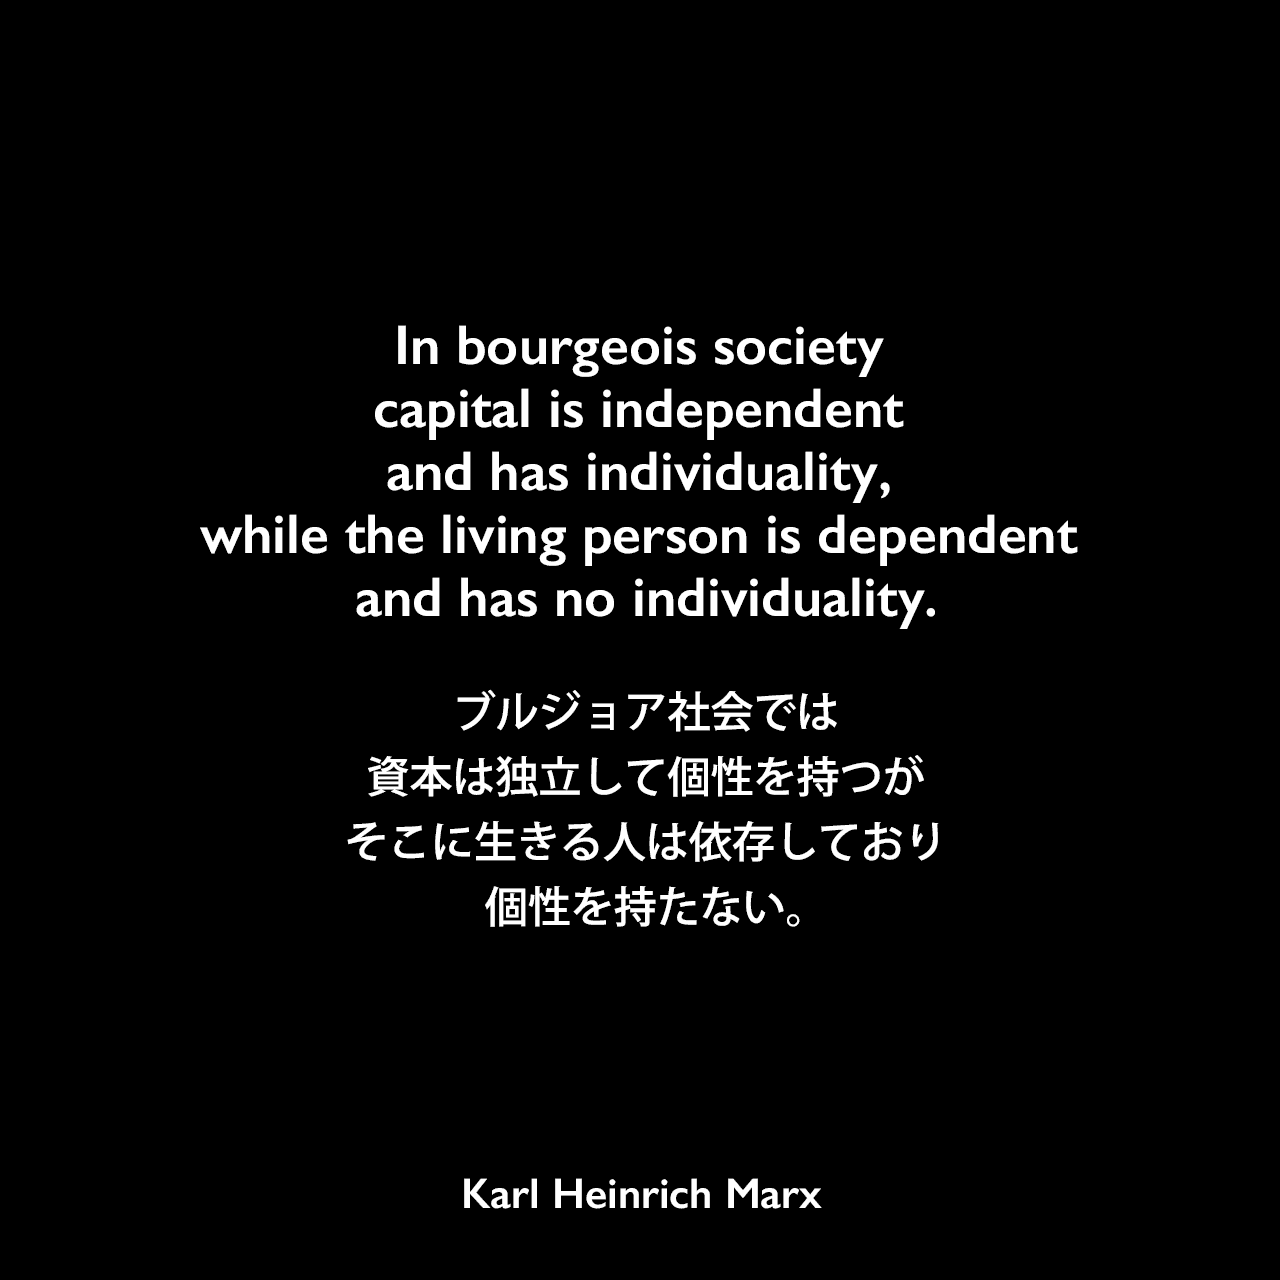 In bourgeois society capital is independent and has individuality, while the living person is dependent and has no individuality.ブルジョア社会では、資本は独立して個性を持つが、そこに生きる人は依存しており個性を持たない。- カール・マルクス とフリードリヒ・エンゲルスの共著「共産党宣言」よりKarl Heinrich Marx